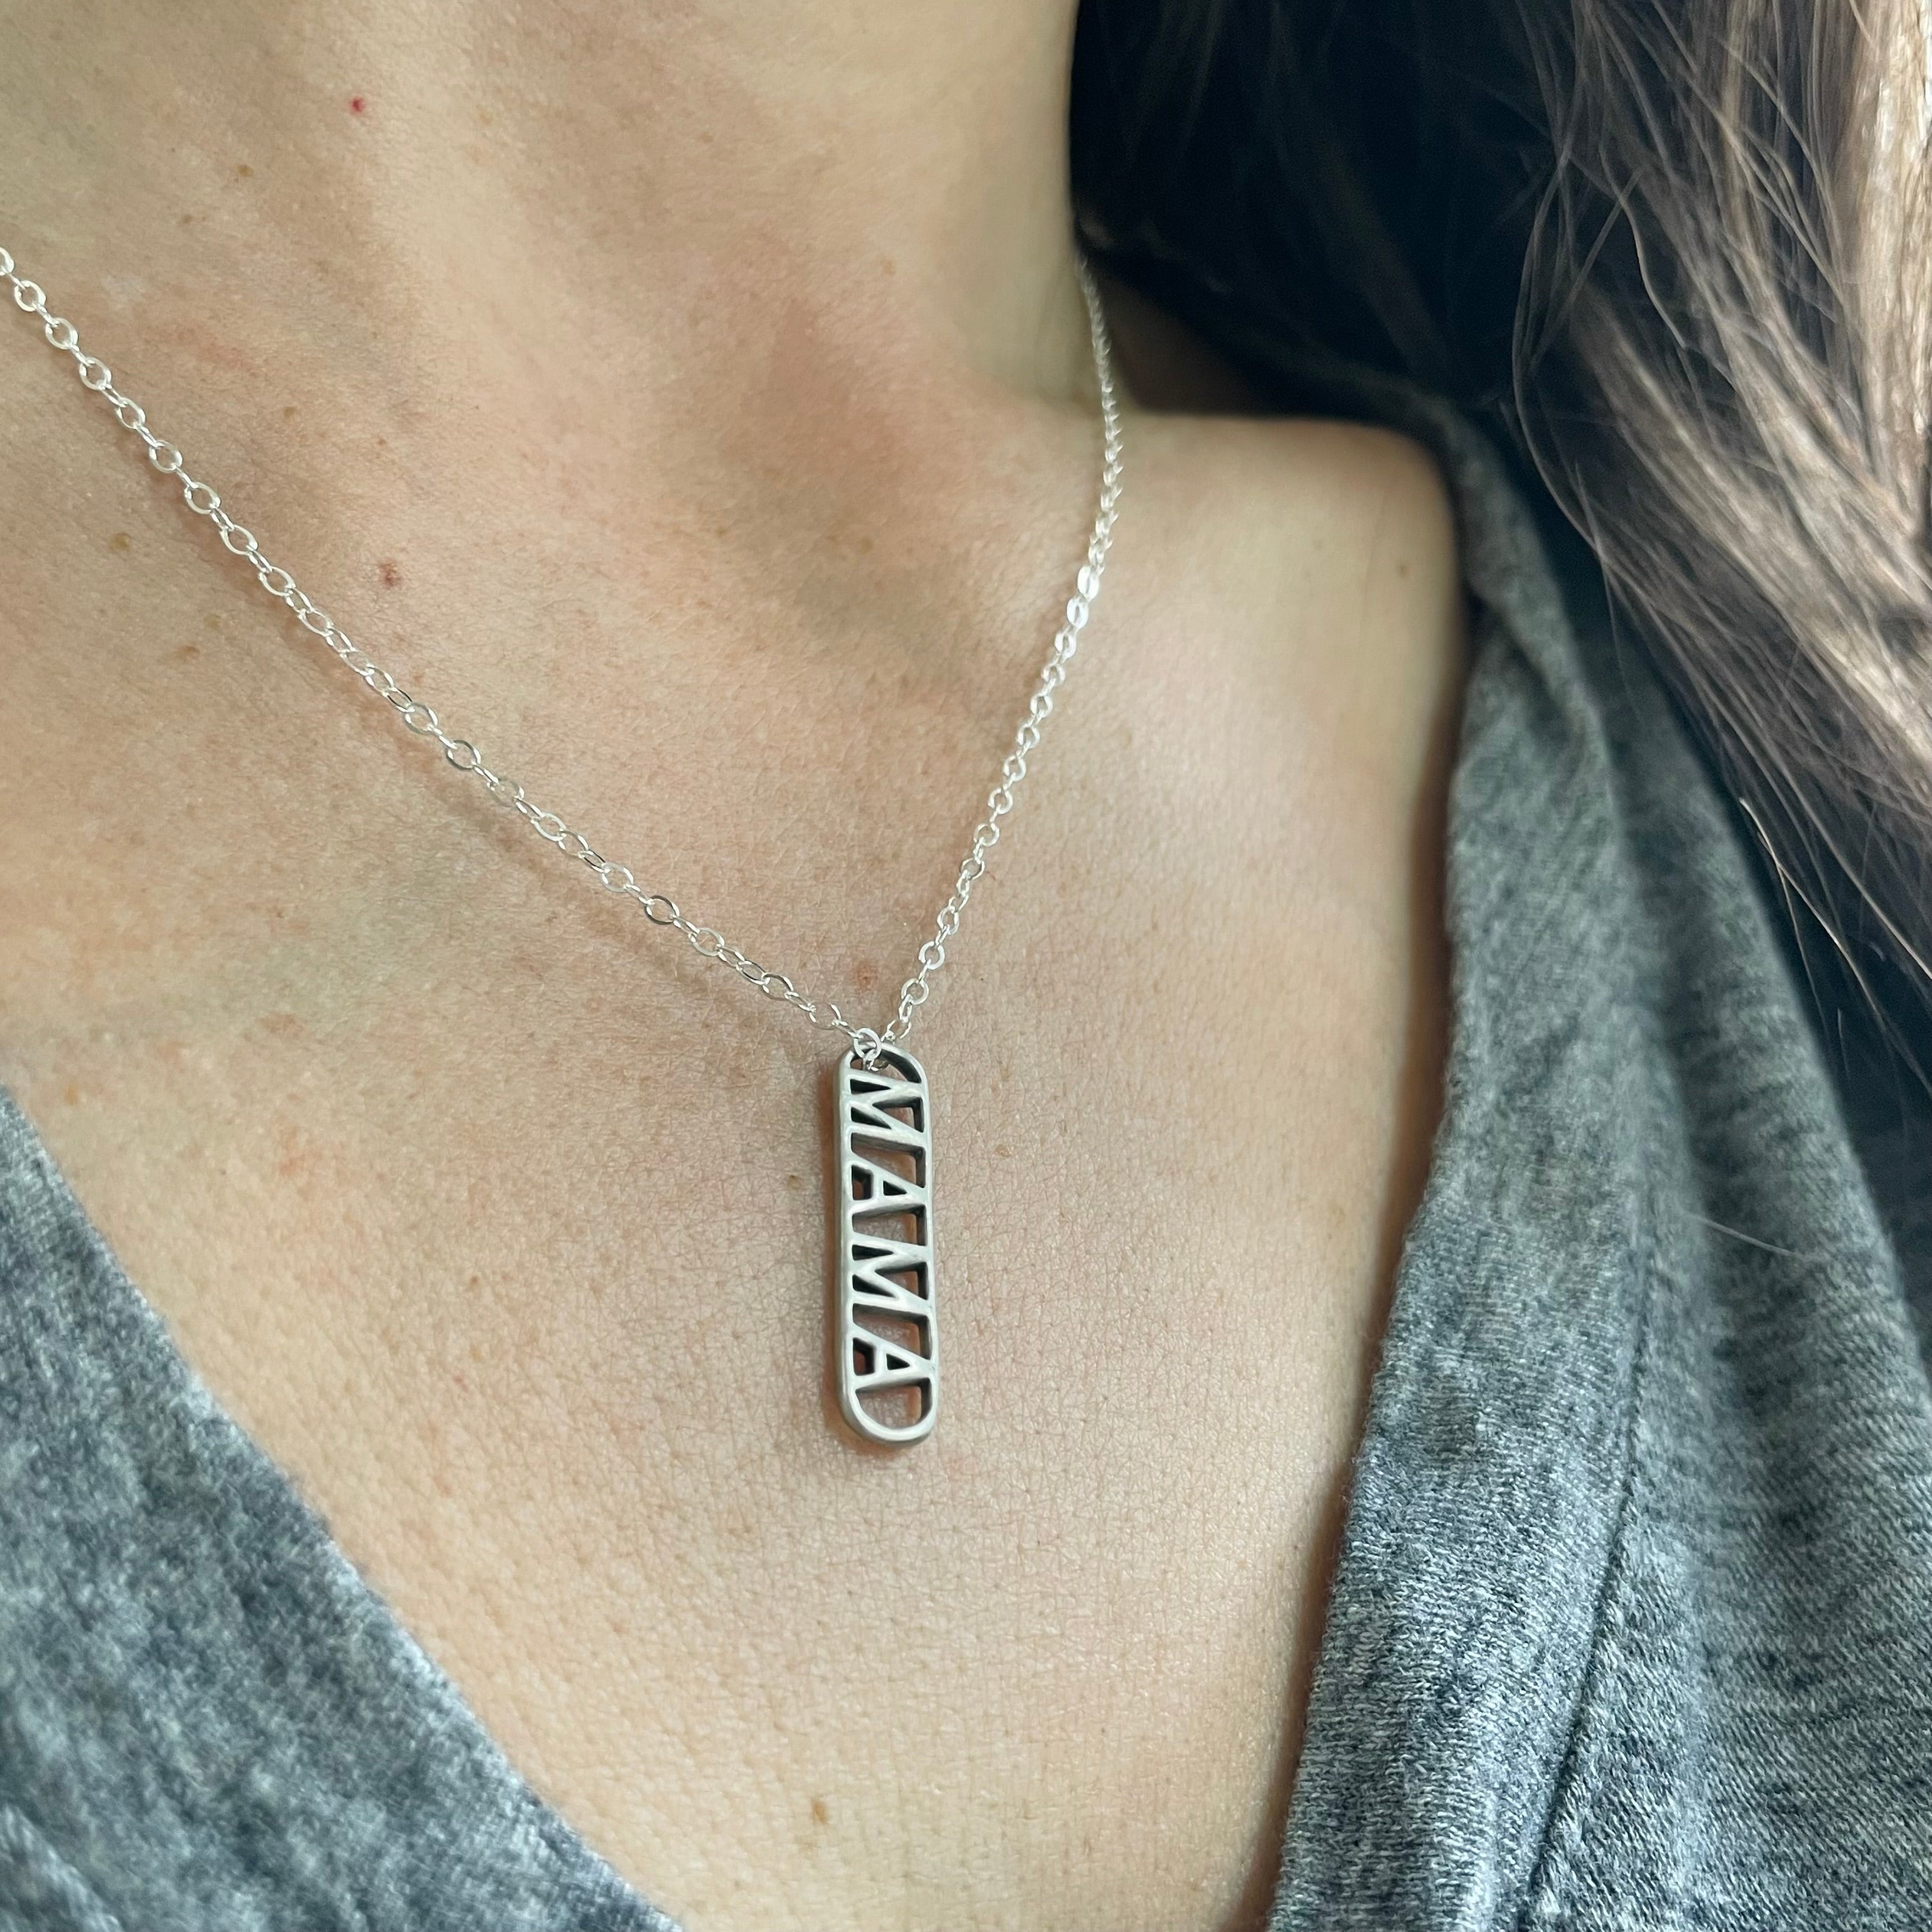 Buy wholesale Mama Necklace Silver, Mother Necklace, Rosary Necklace, Mama  Pendant, Mothers Day Gift, Made from Sterling Silver 925.